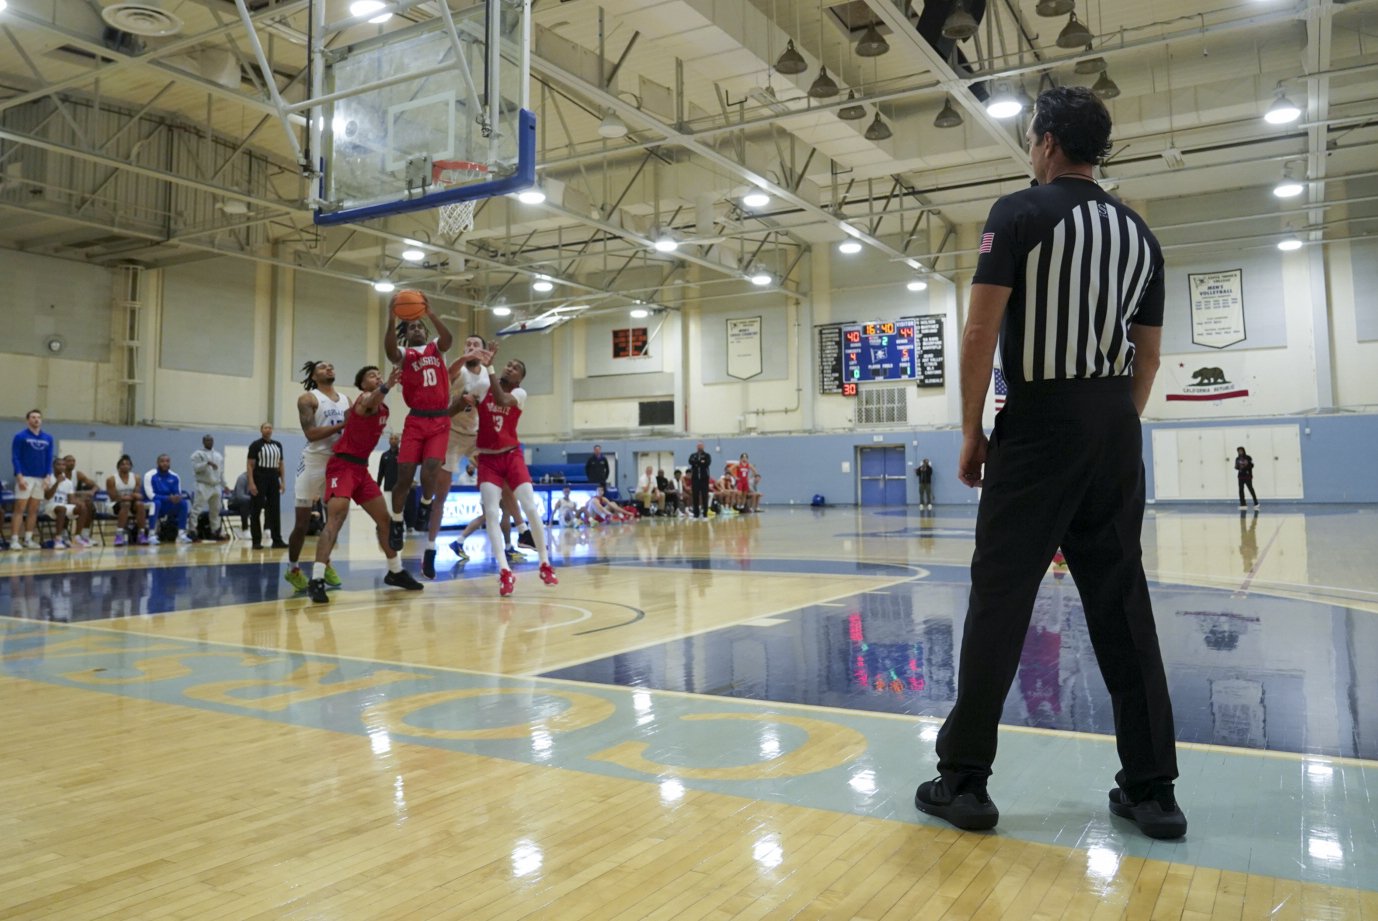  An official looks on as the San Diego City College Knights attempt to score against the Santa Monica college Corsairs during a basketball game at Santa Monica College Saturday, Nov 6 2022. The Corsairs lost the game by a difference of eleven points.